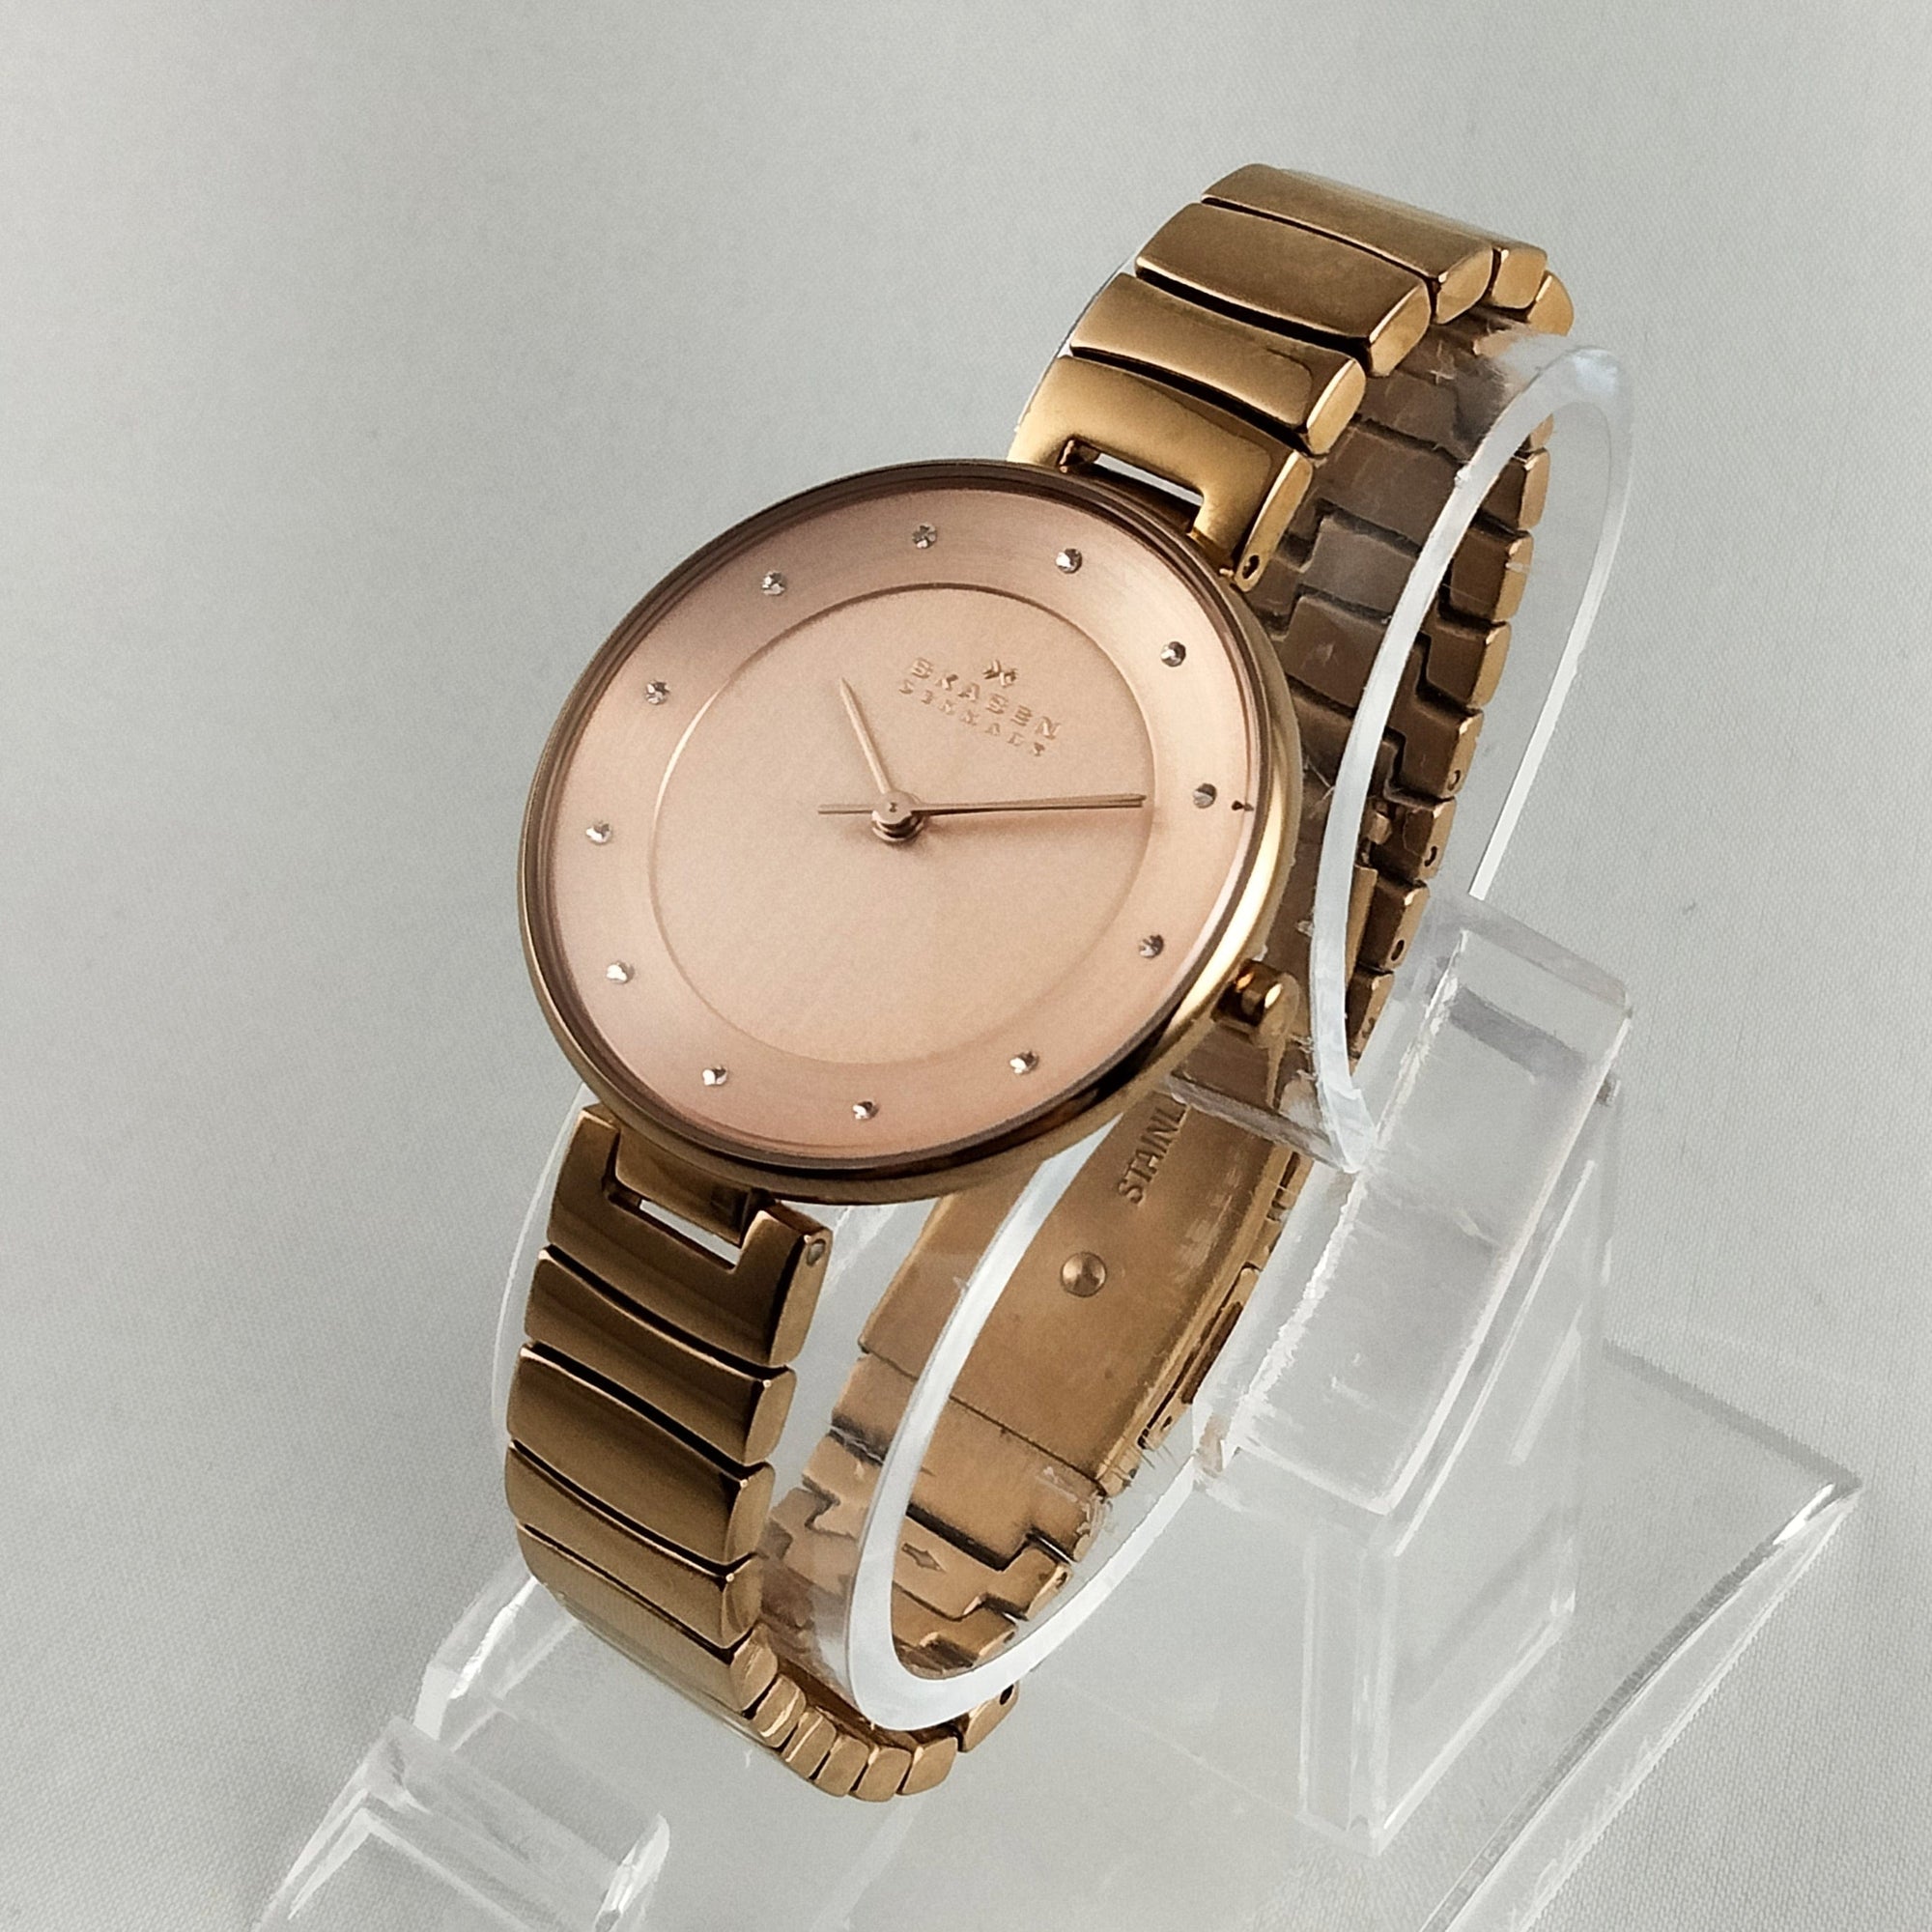 I Like Mikes Mid Century Modern Watches Skagen Women's Stainless Steel Gold Tone Watch, Rose Gold Tone Dial, Jewel Hour Markers, Bracelet Strap